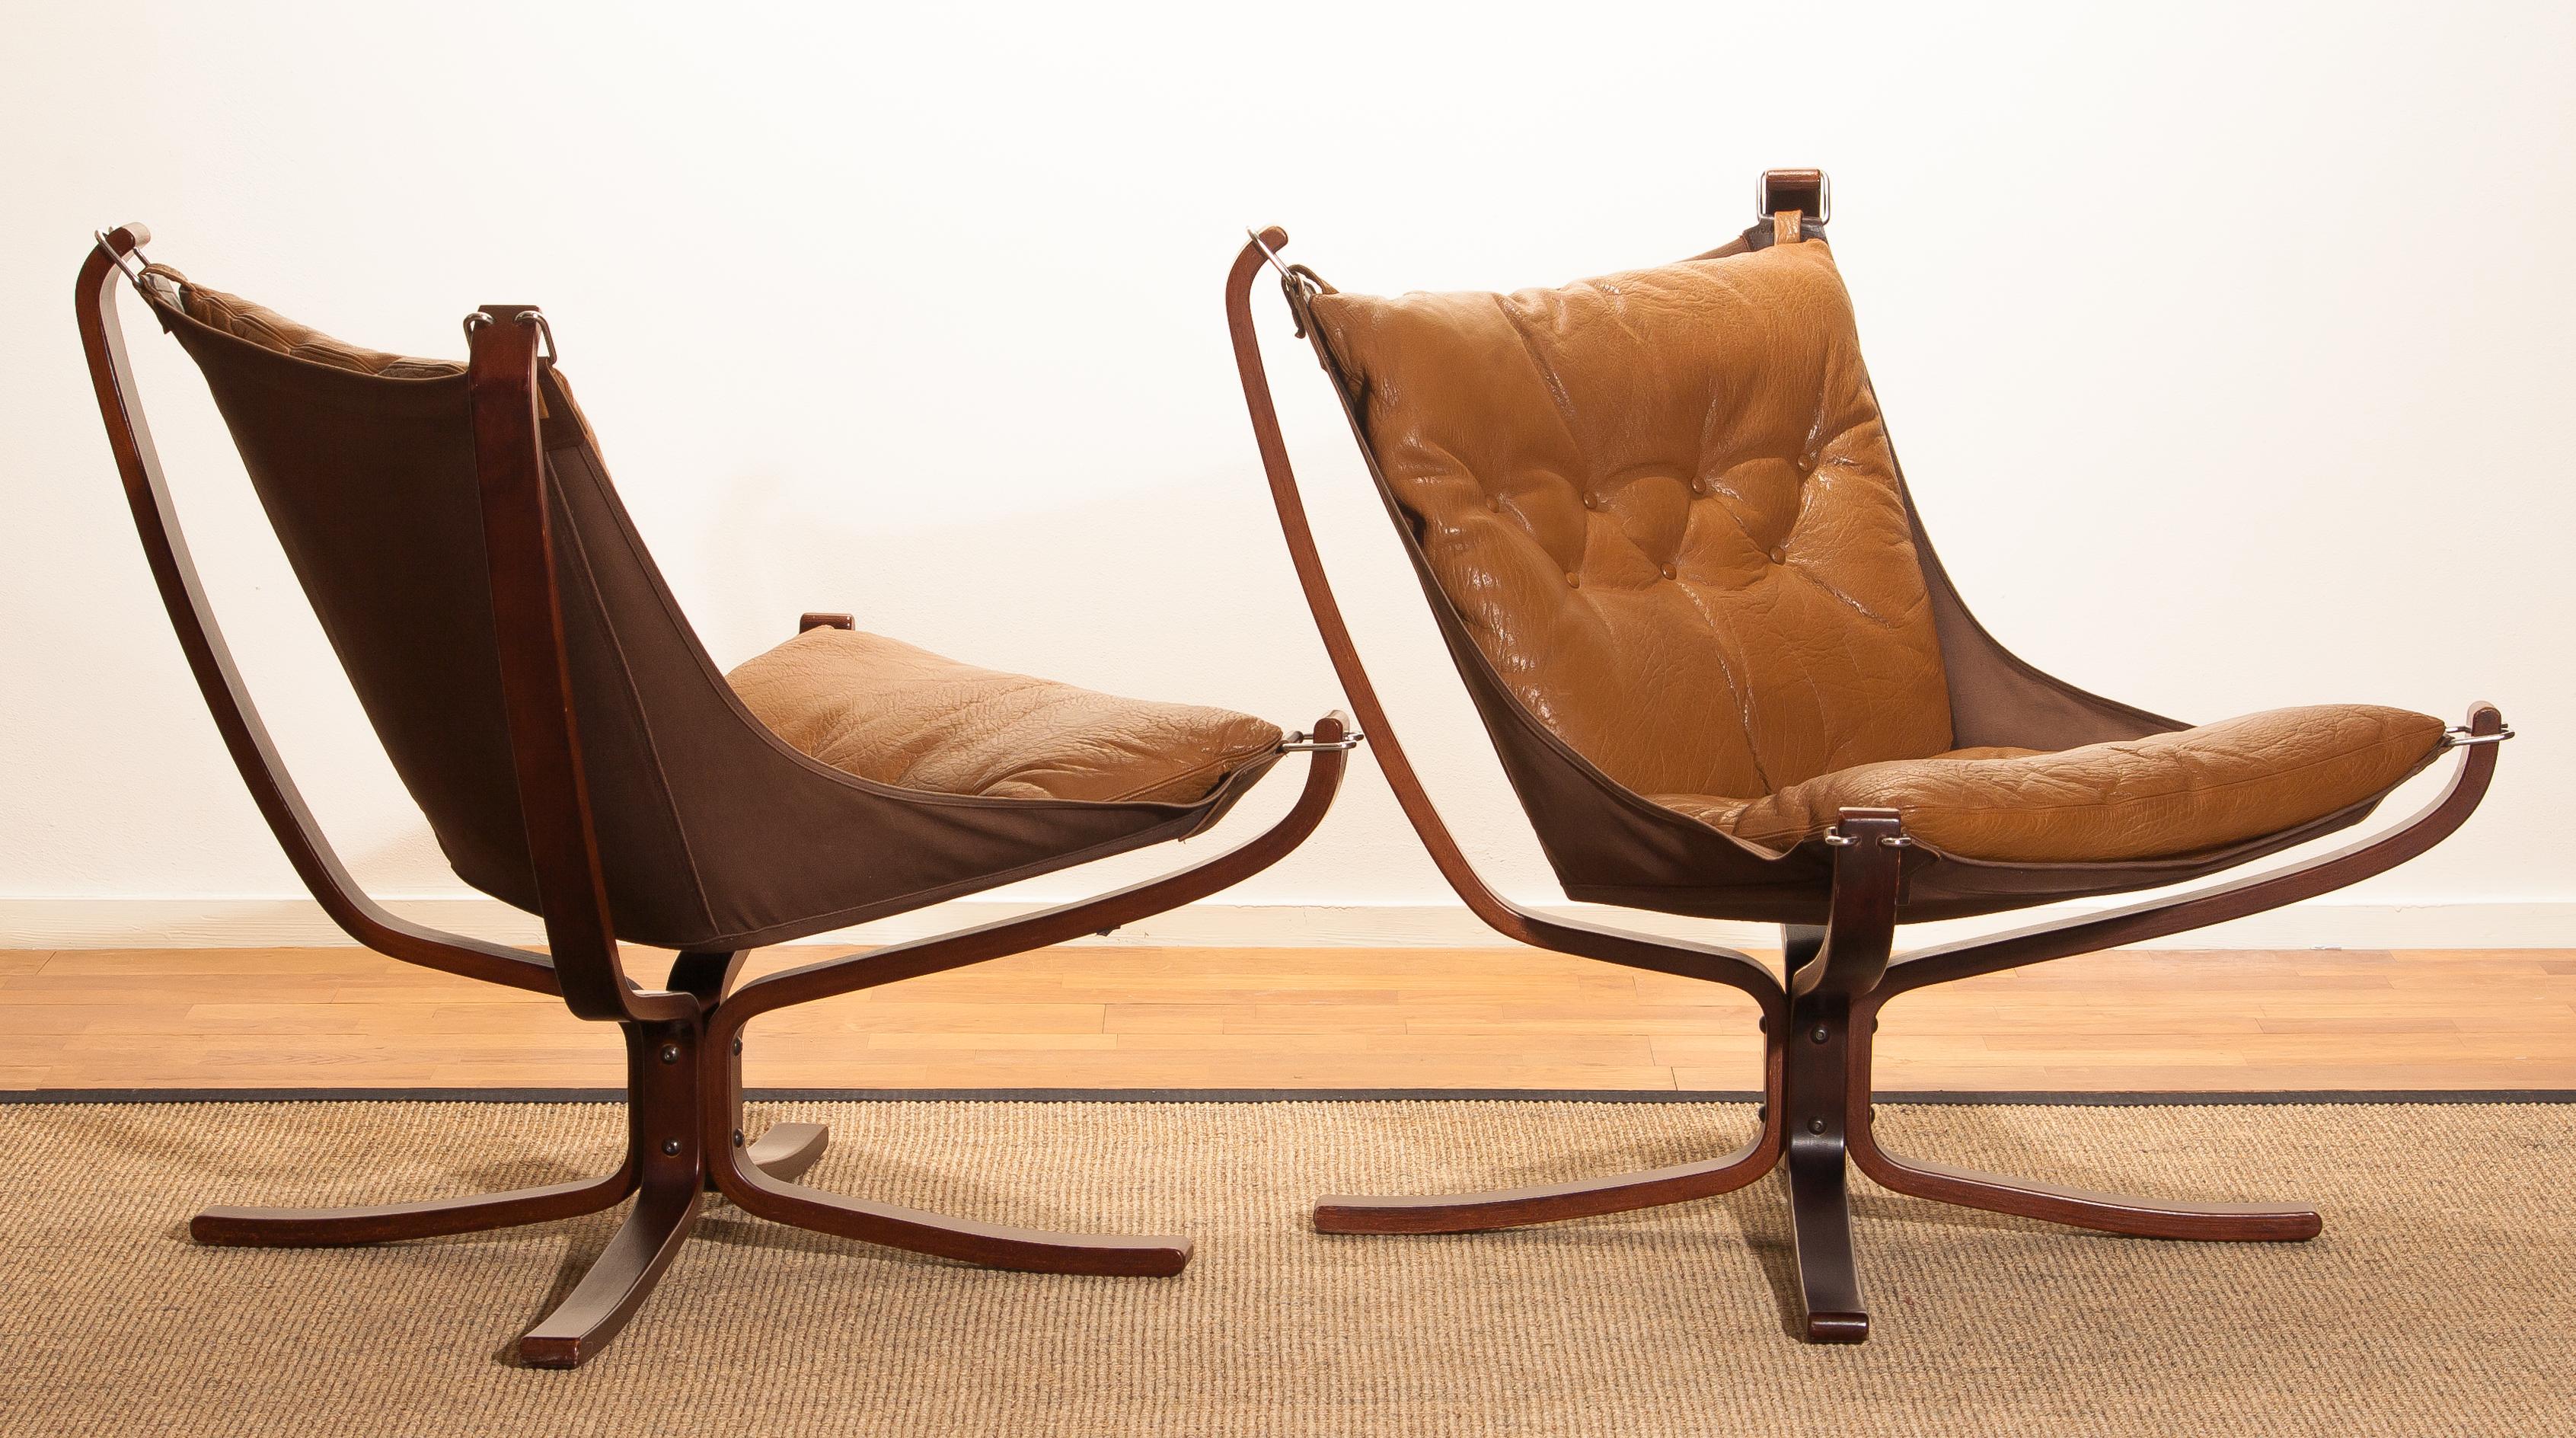 Extremely beautiful set of two lounge chairs or easy chairs. All designed by Sigurd Ressell Norway.
The two chairs are in very good original condition.
The camel leather seating as the wooden frames are all in perfect condition.

Period